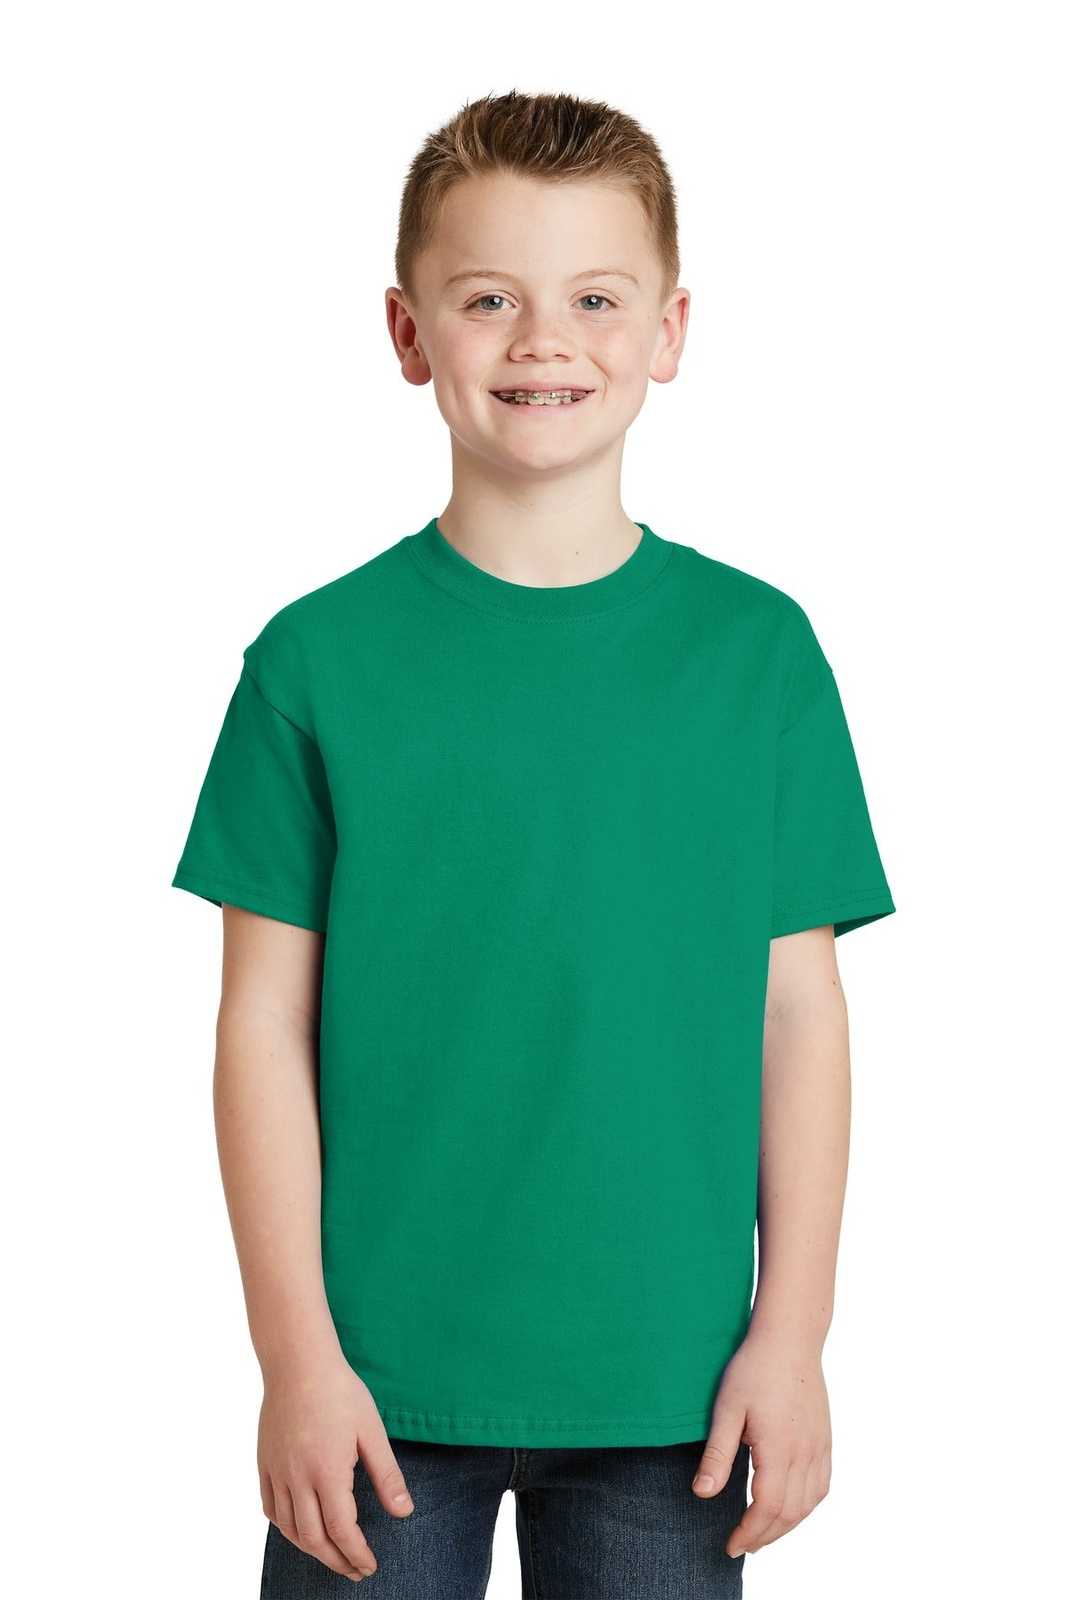 Hanes Authentic Kids' Cotton T-Shirt Kelly Green XS